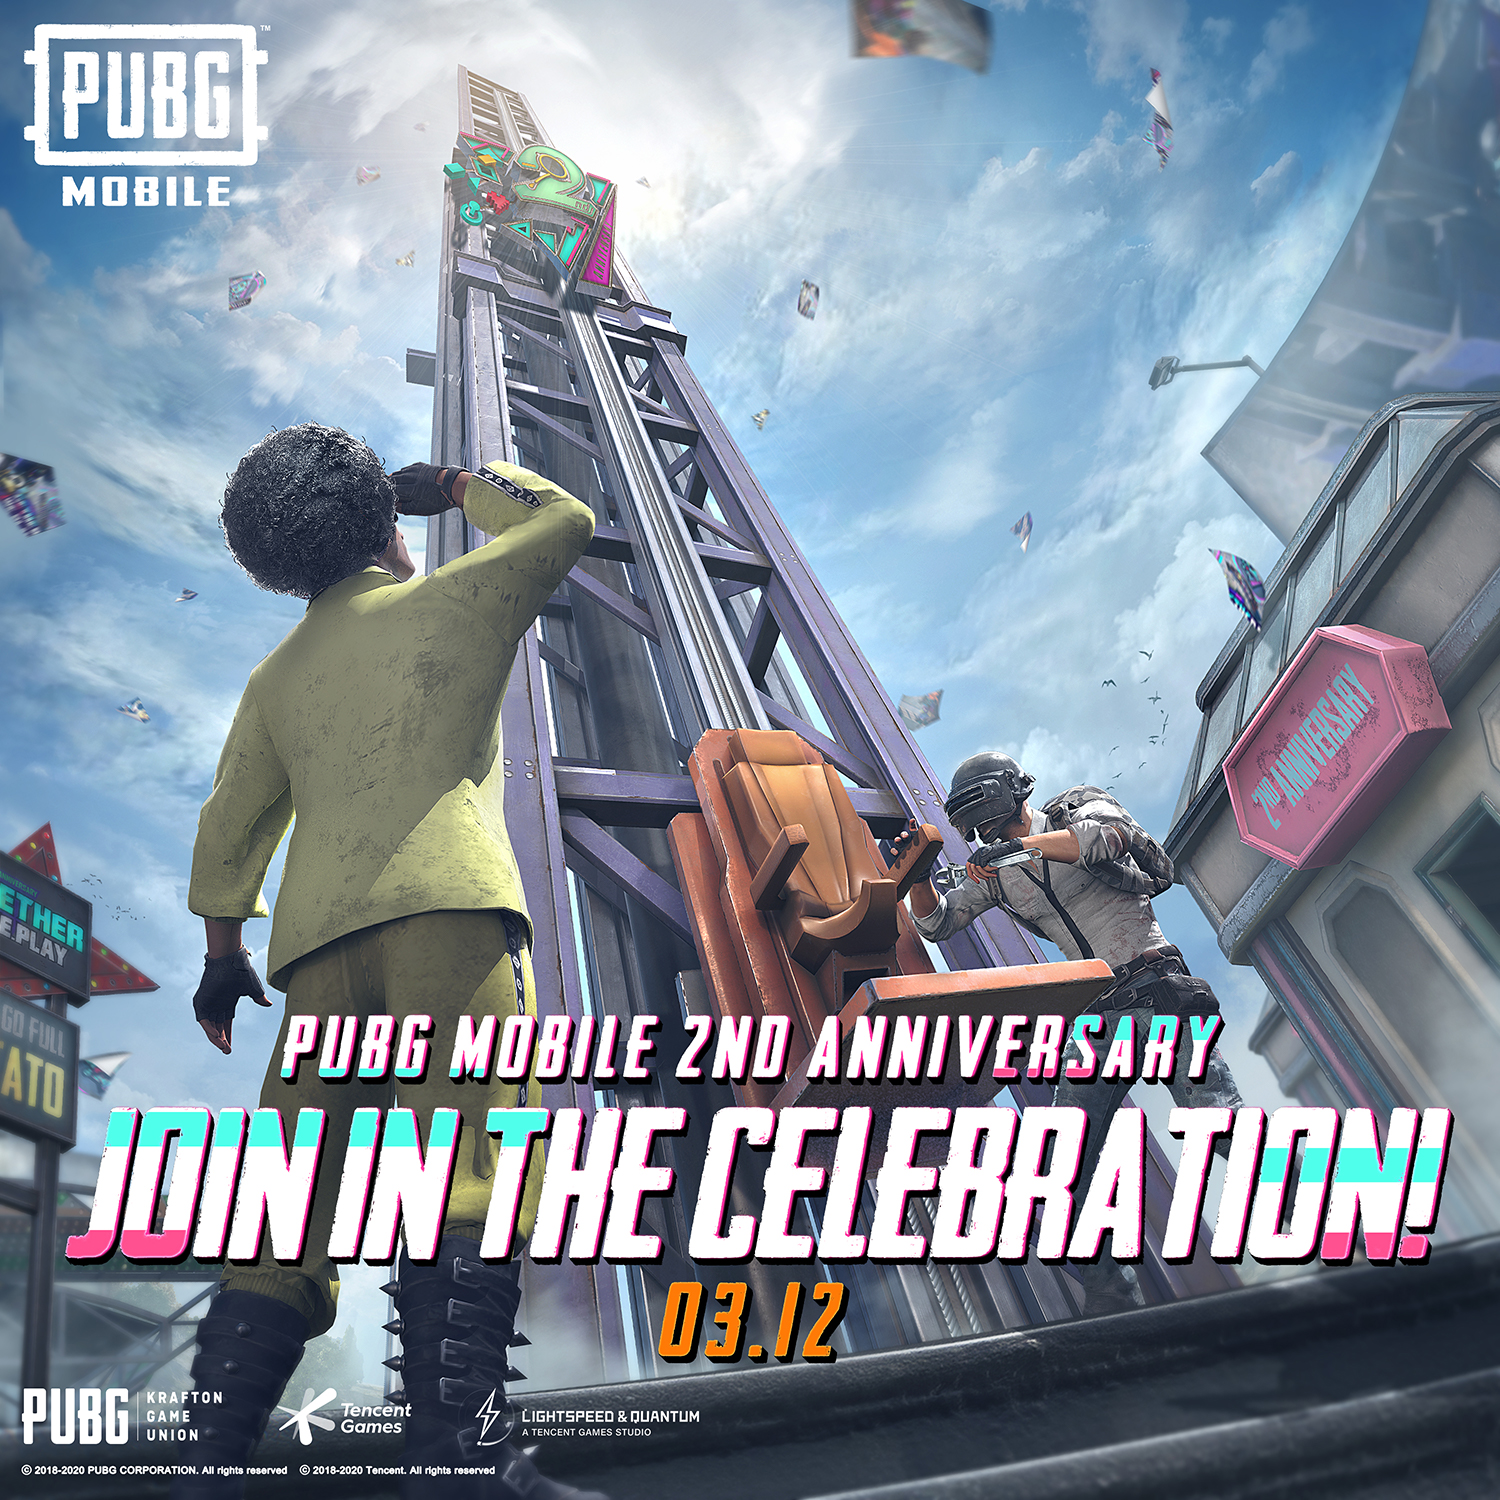 Pubg Mobileさんのツイート We Re Only Three Days Away From The Pubg Mobile 2nd Anniversary What Event Are You Most Excited About 2getherweplay T Co S75ucxdezu